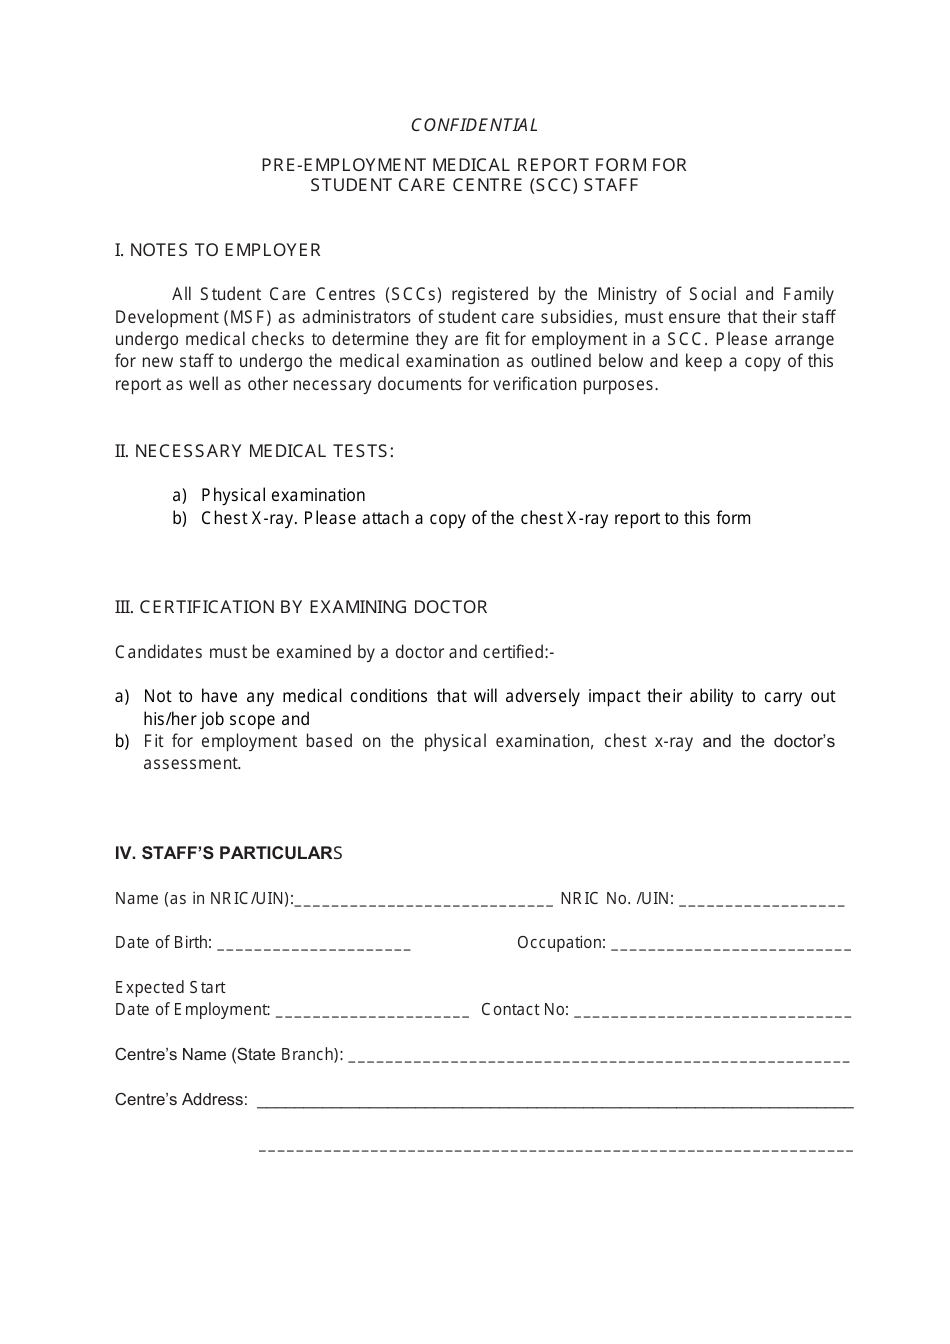 Pre-employment Medical Report Form for Student Care Centre (Scc) Staff - Singapore, Page 1